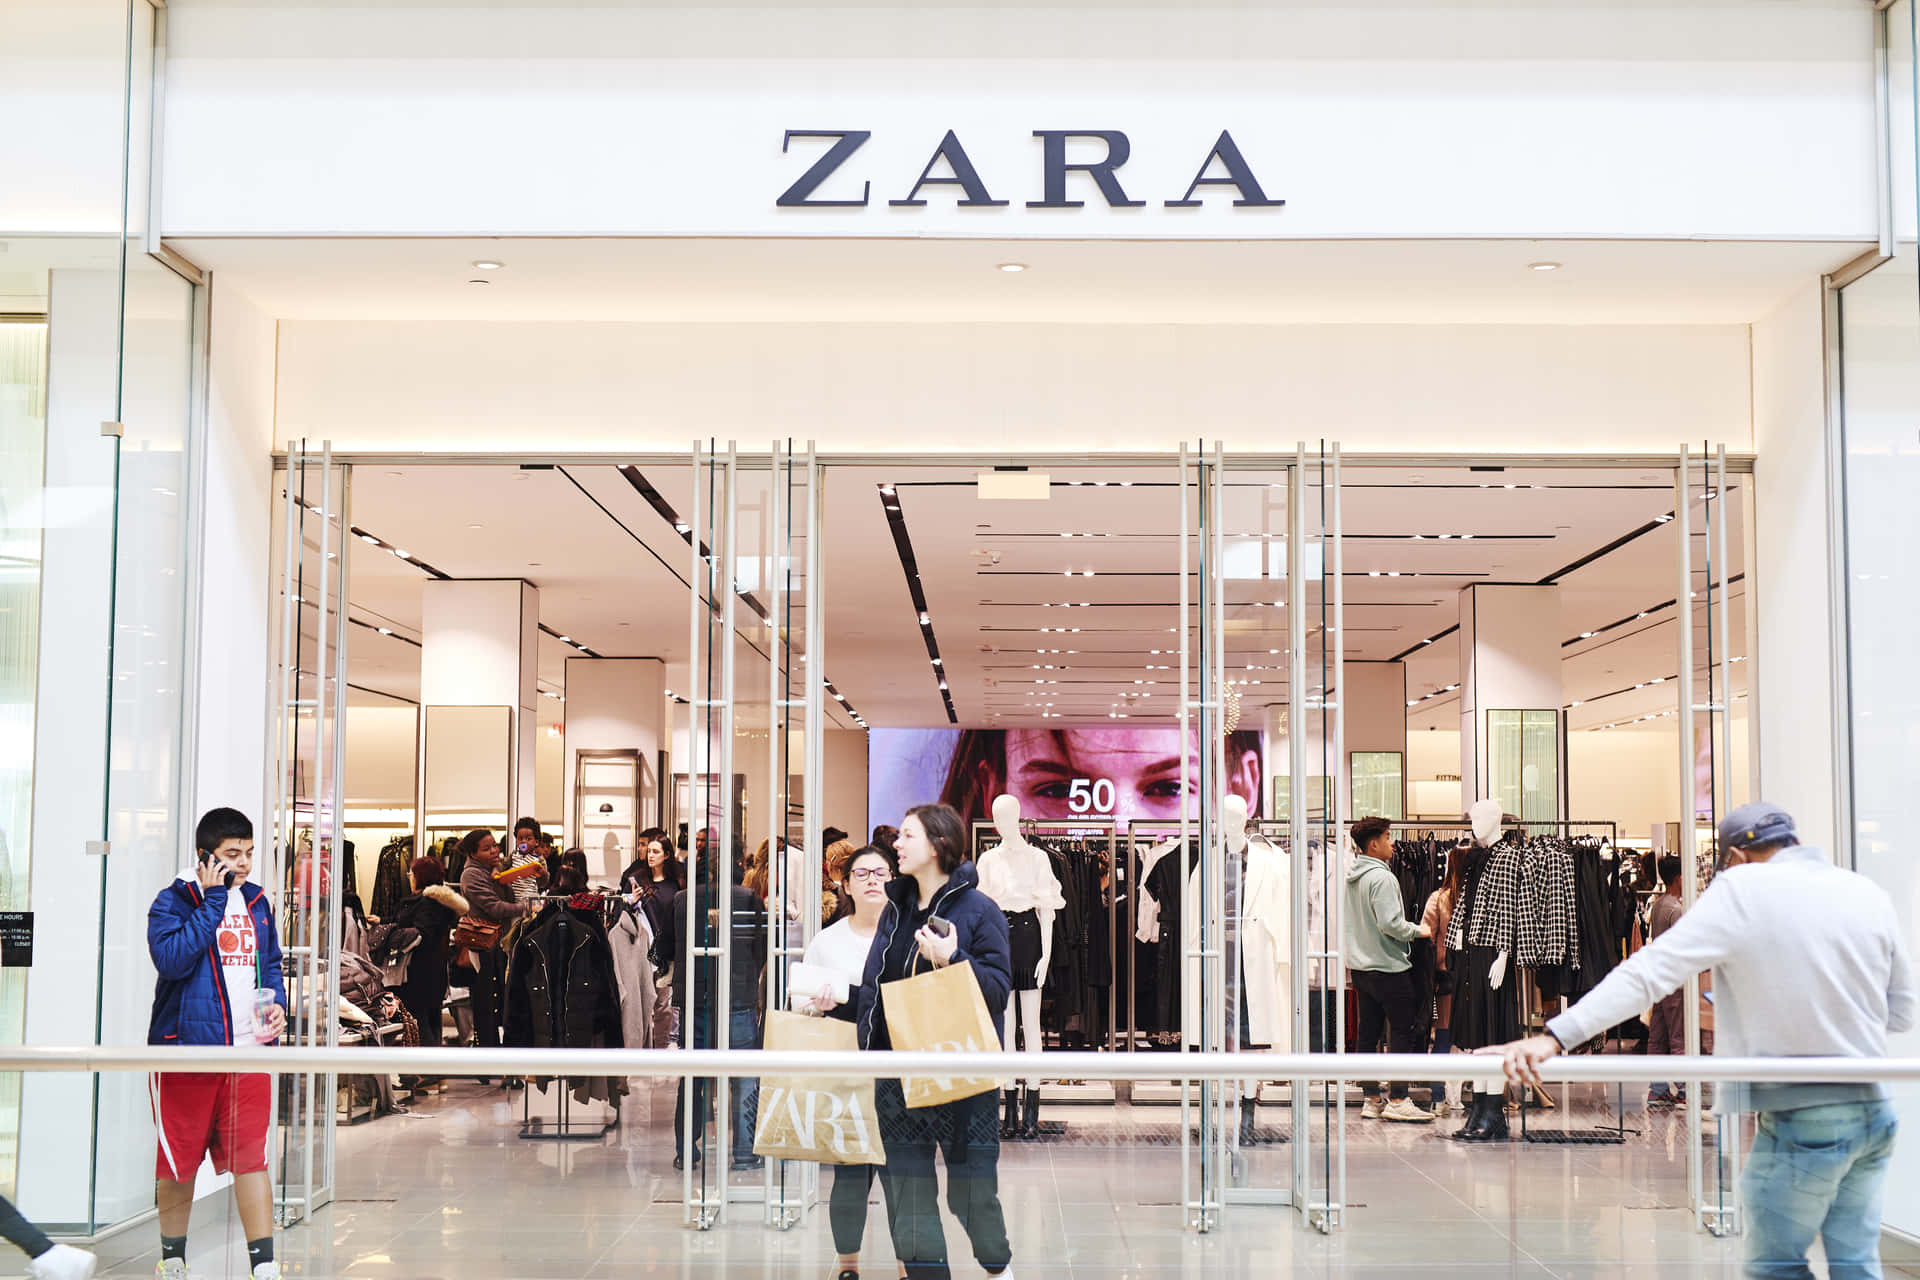 Stylish and Fashionable: the Latest Trends From Zara